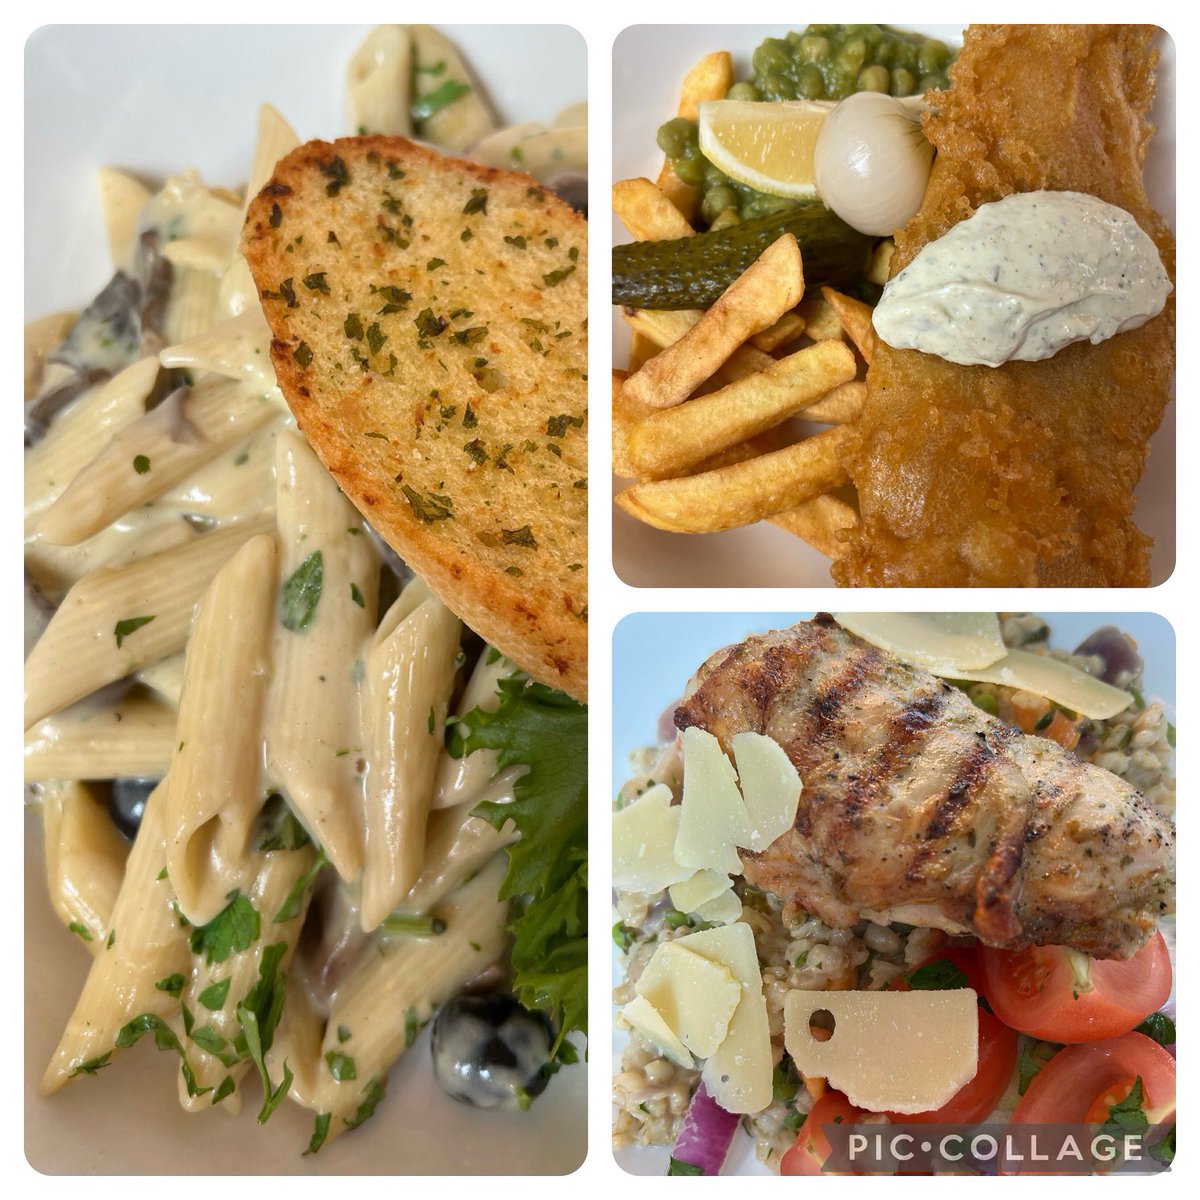 On todays menu in the EDUkitchen we are serving: -ASPH Fish and Chips with Homemade Tartare Sauce -Mushroom Penne Carbonara with Garlic Bread -Grilled Herby Chicken with Pearl Barley Risotto @LoveBritishFood #greathospitalfood